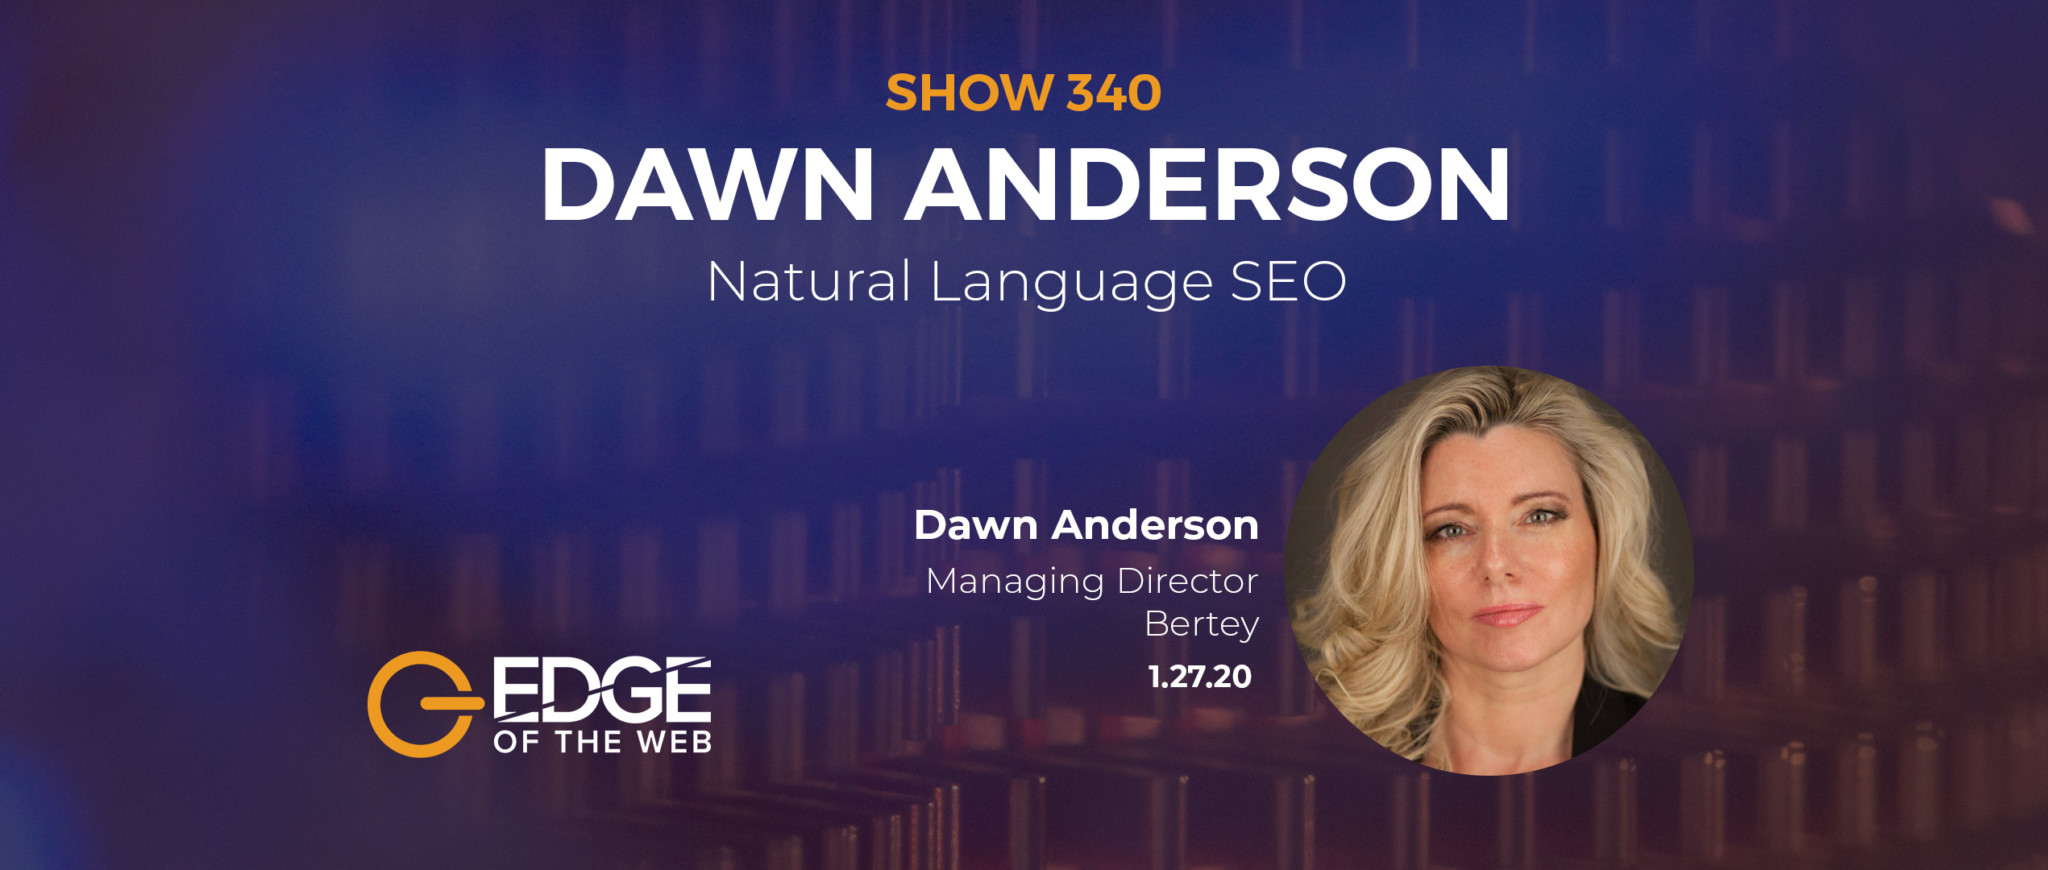 Show 340: Natural Language SEO, featuring Dawn Anderson